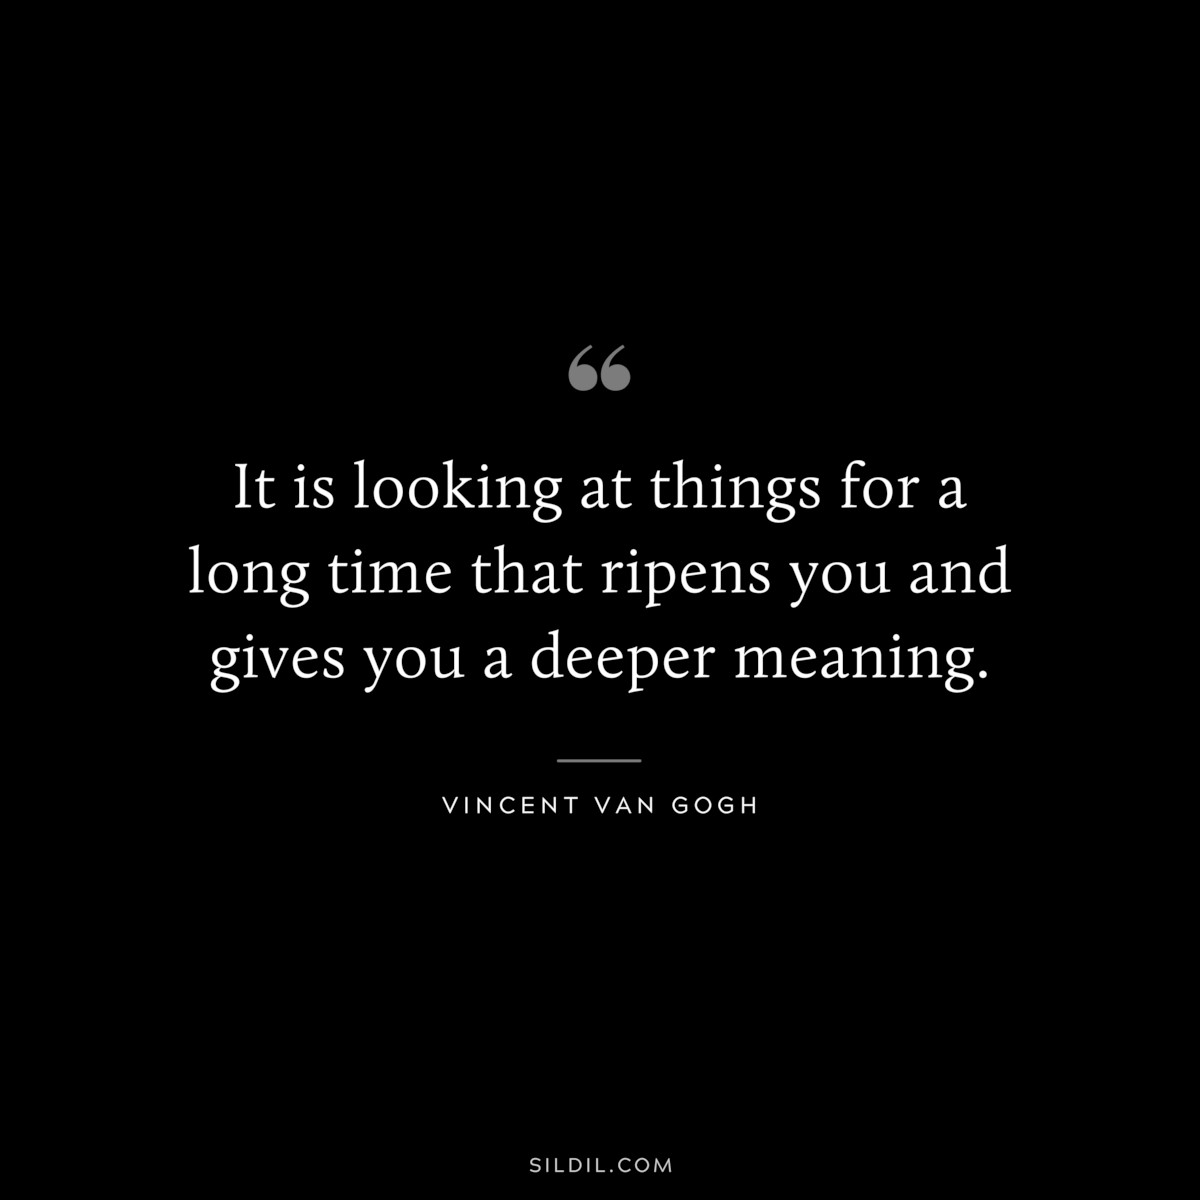 It is looking at things for a long time that ripens you and gives you a deeper meaning. ― Vincent van Gogh